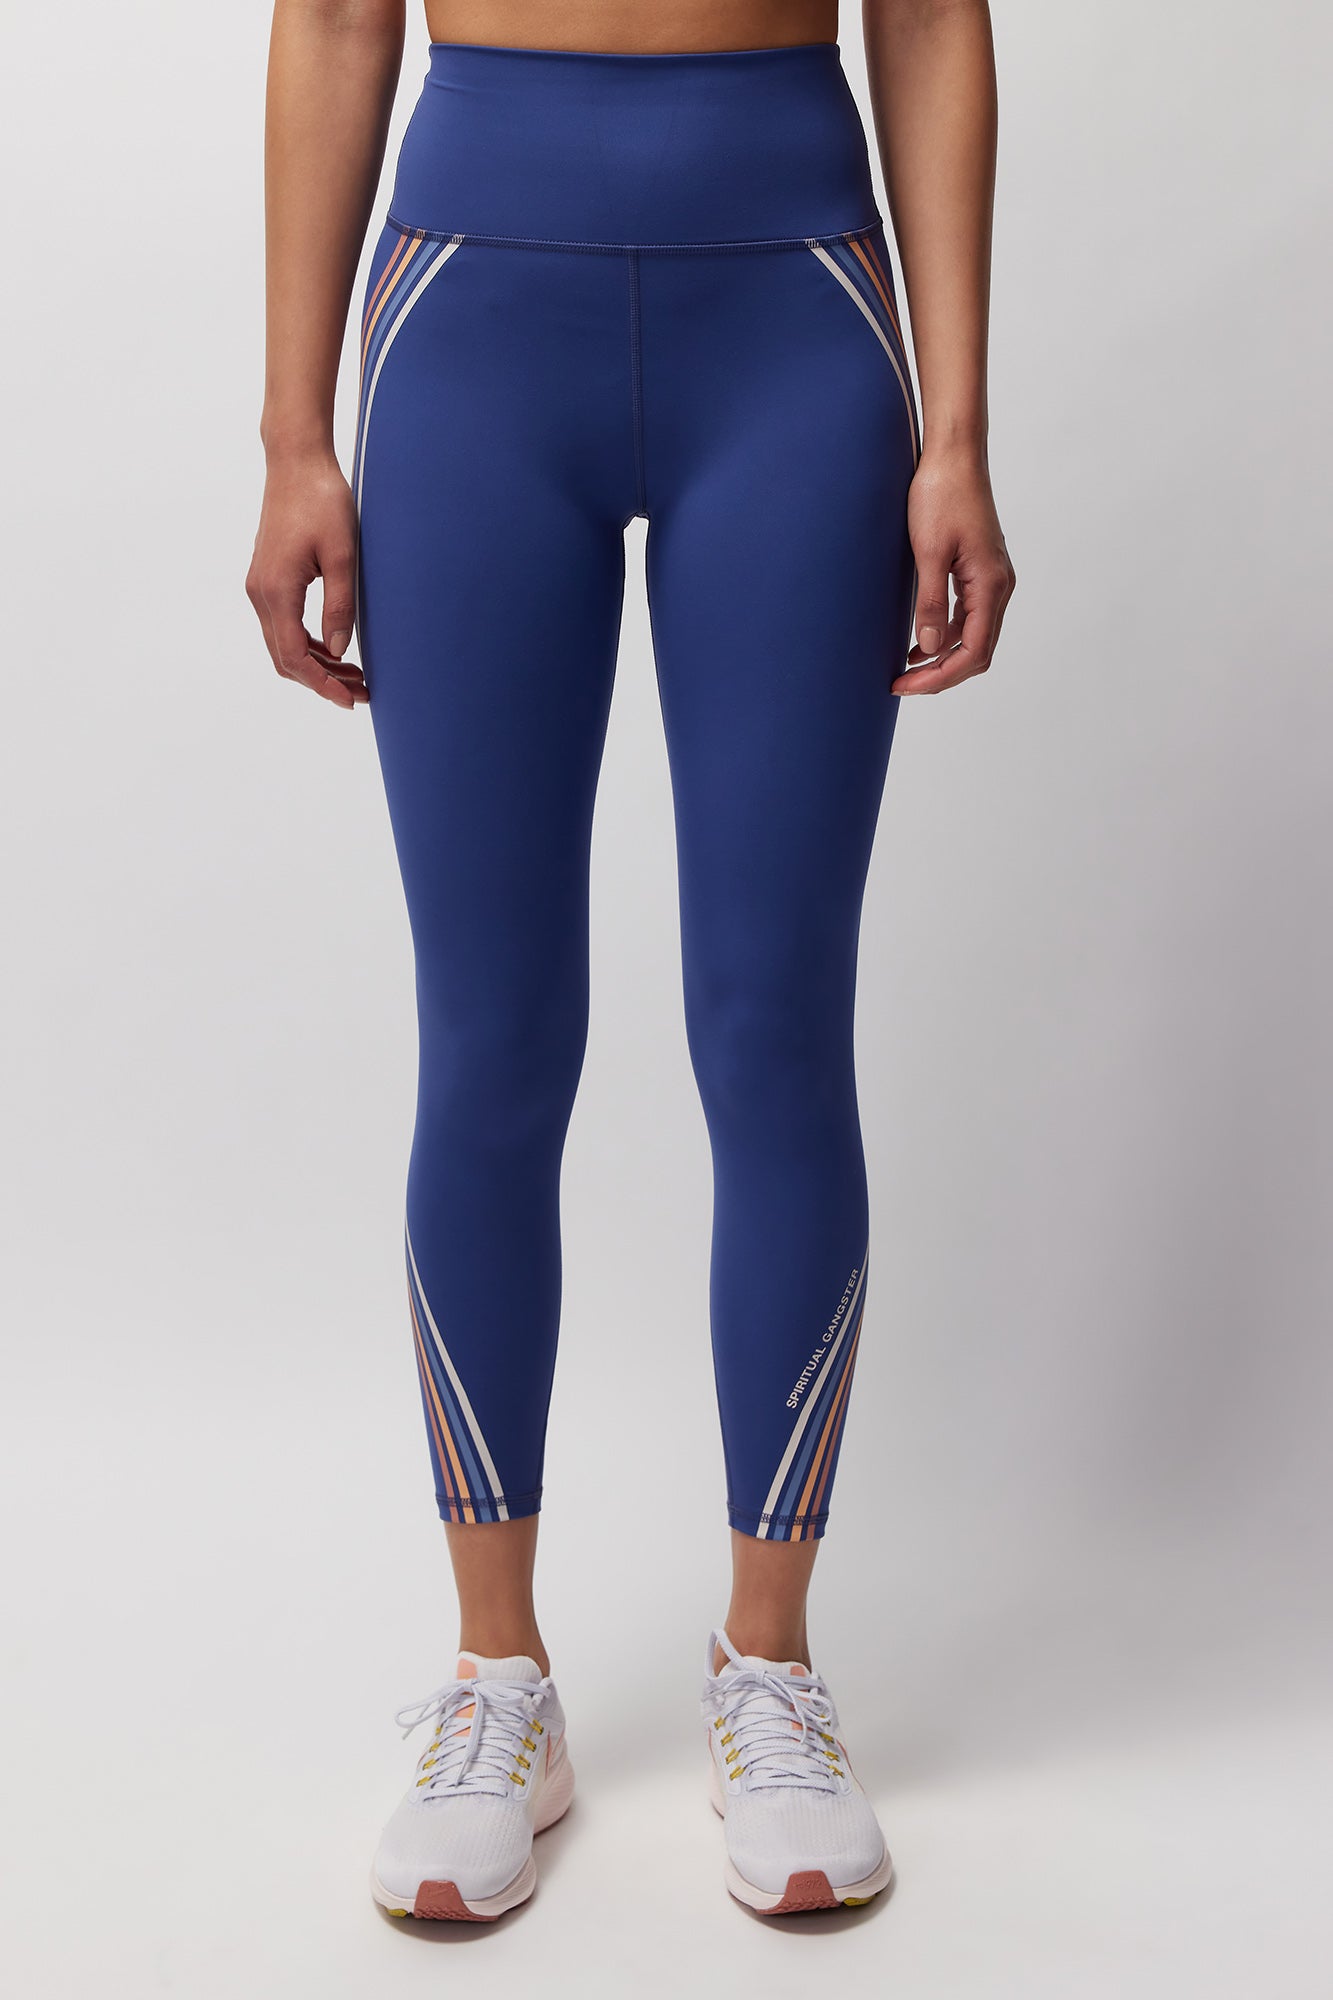 Ellison Ladies SK Motorcycle Leggings  Comfort, safety, and style all in  one urban-centric place.